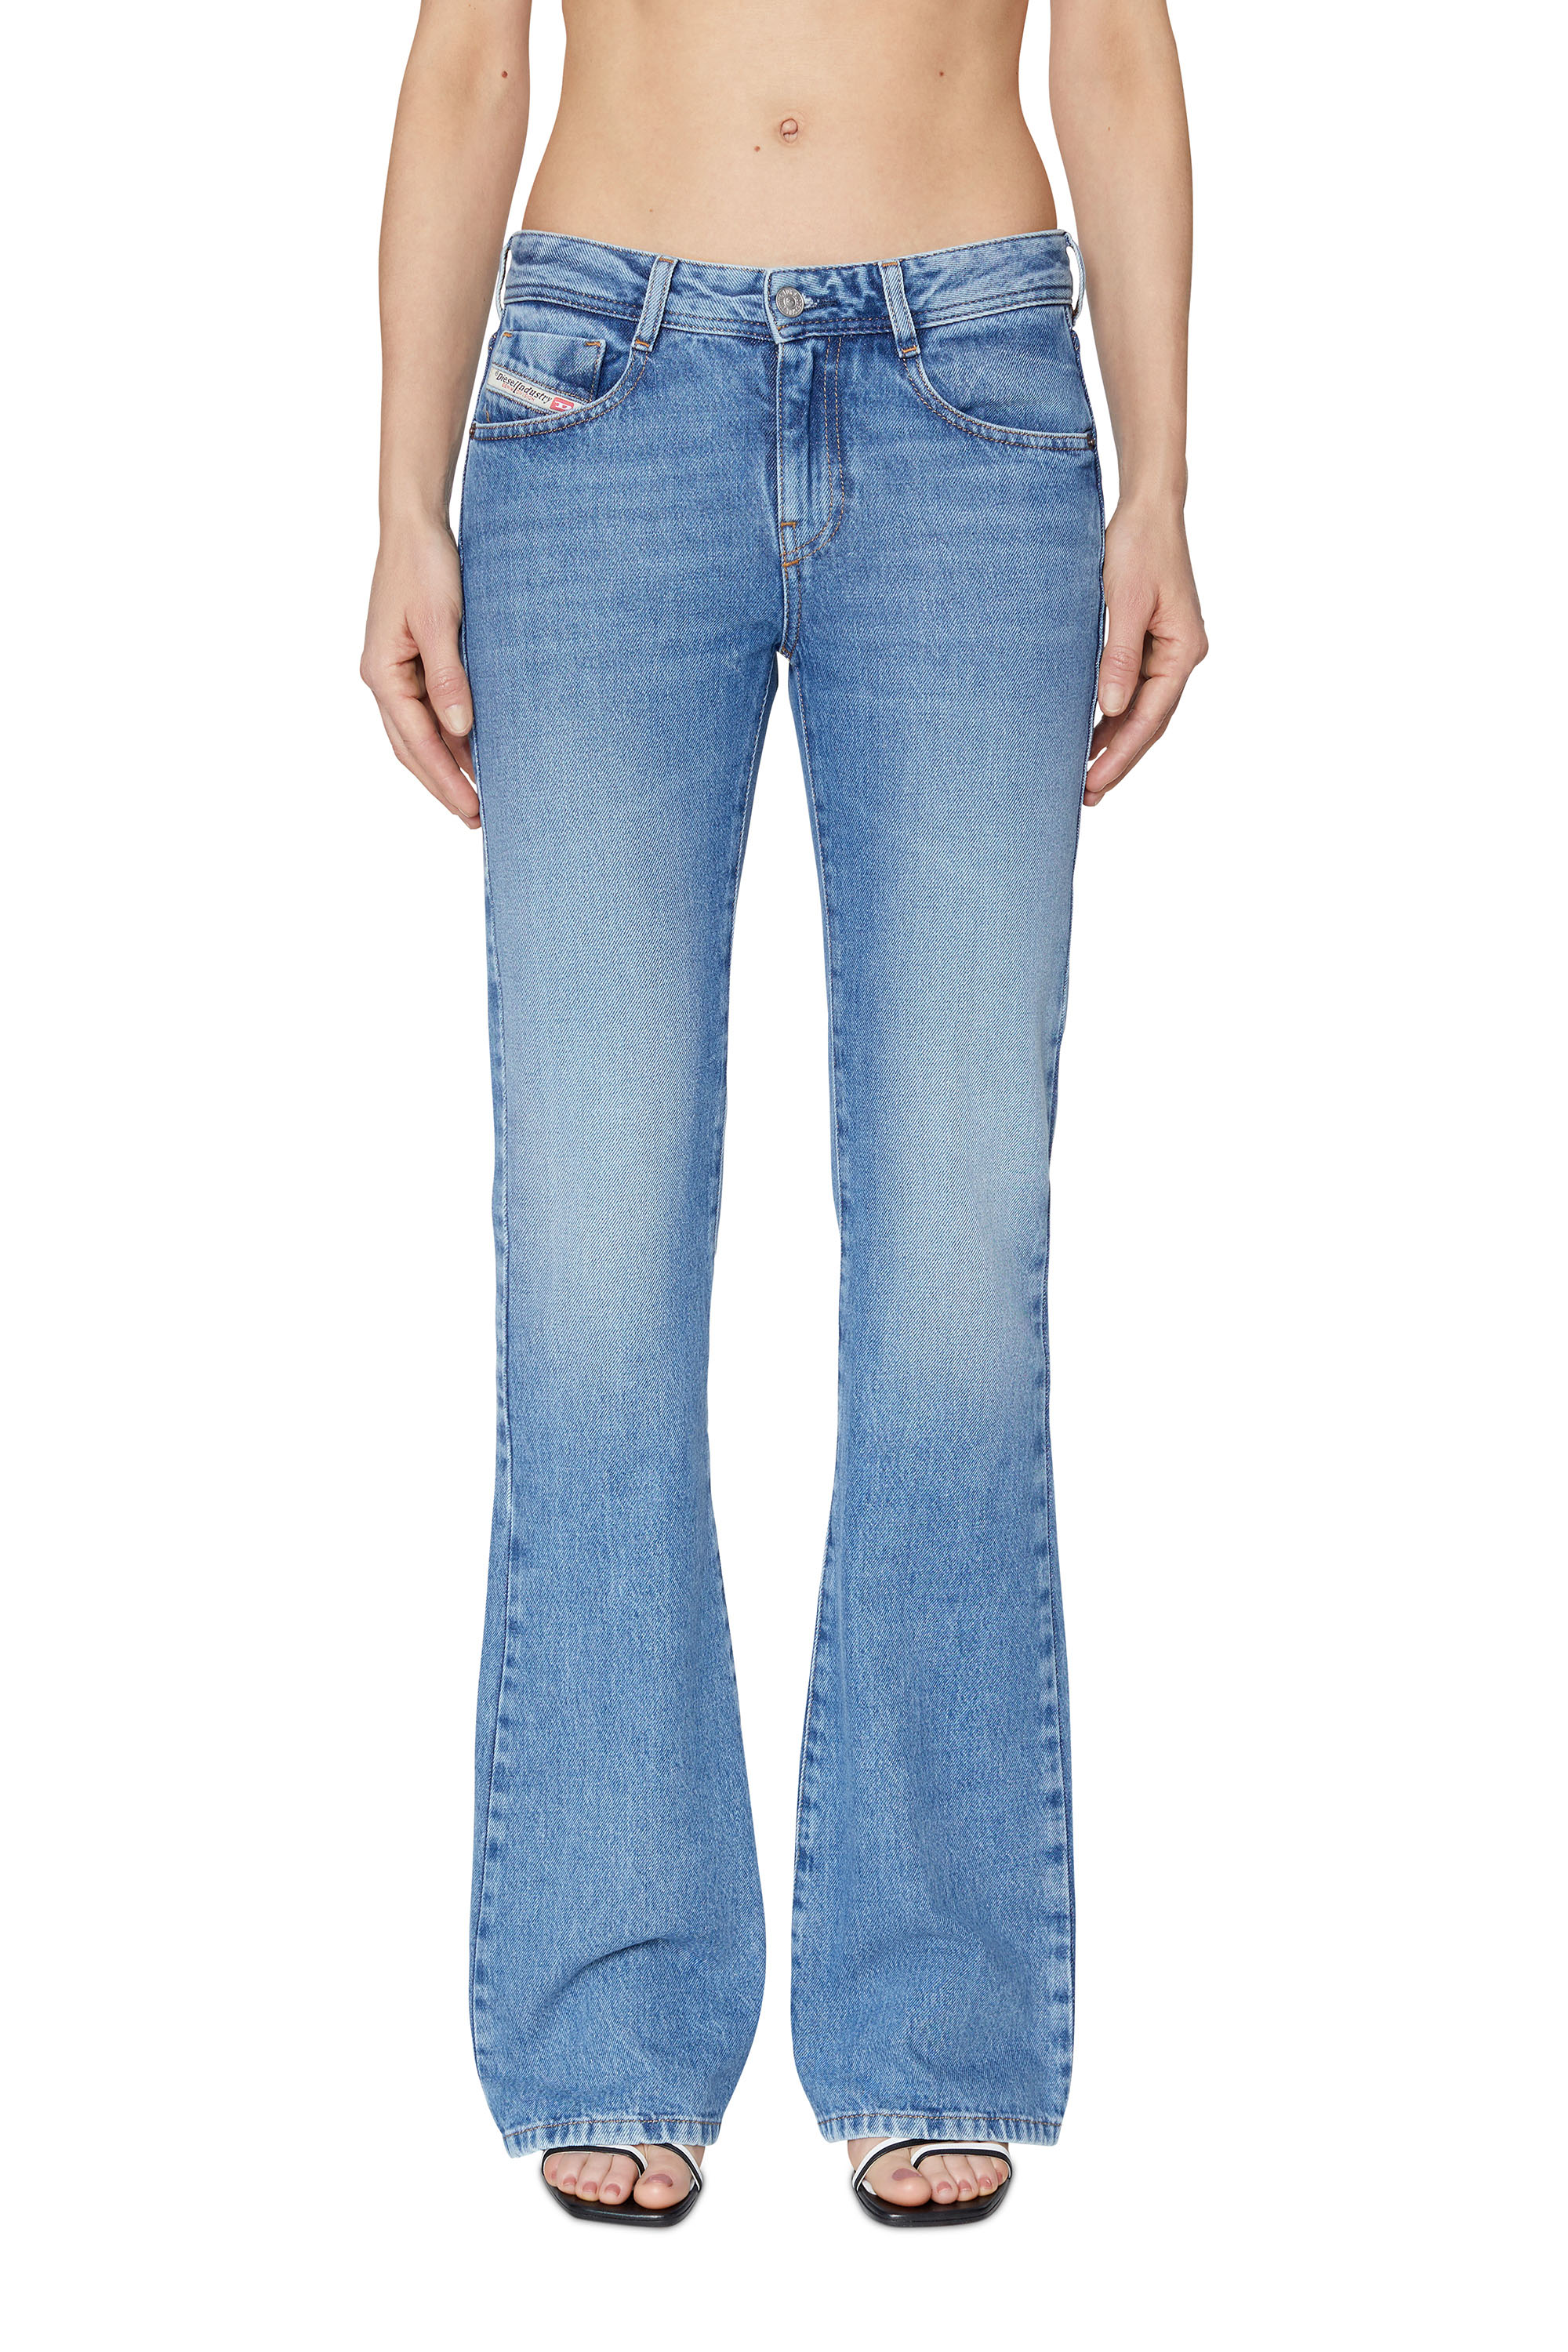 1969 D-EBBEY 09C16 Bootcut and Flare Jeans, Mittelblau - Jeans